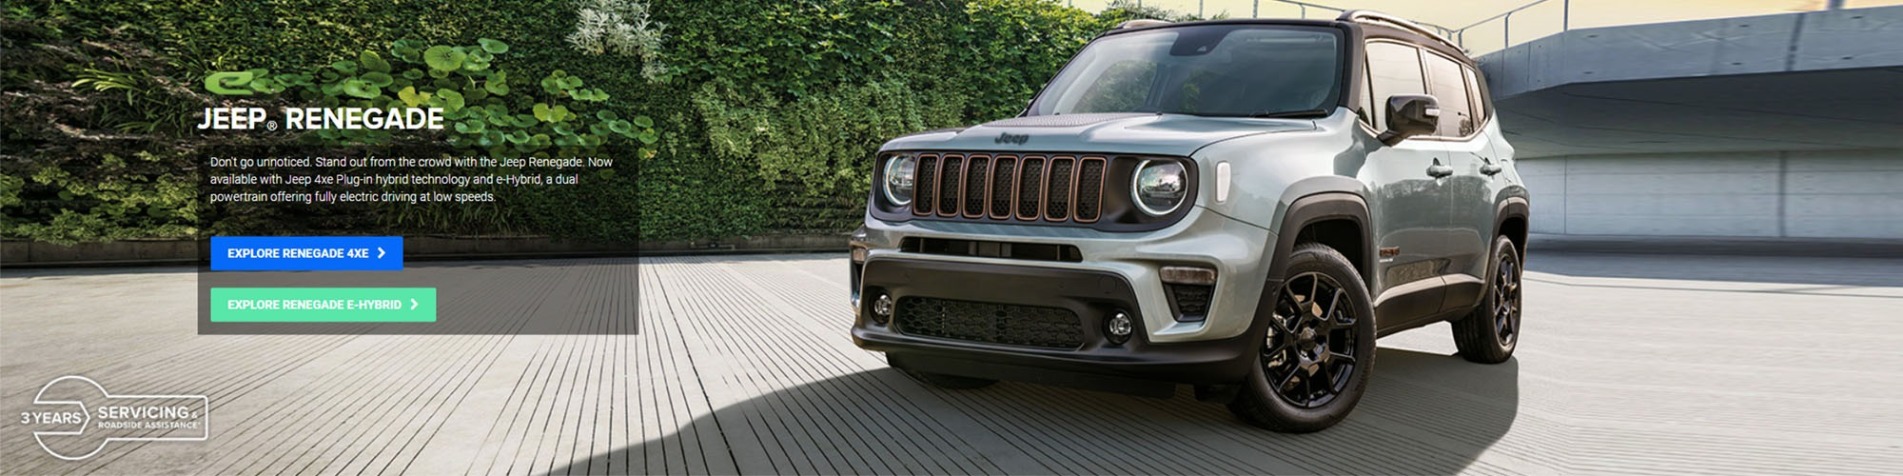 Jeep Renegade banner